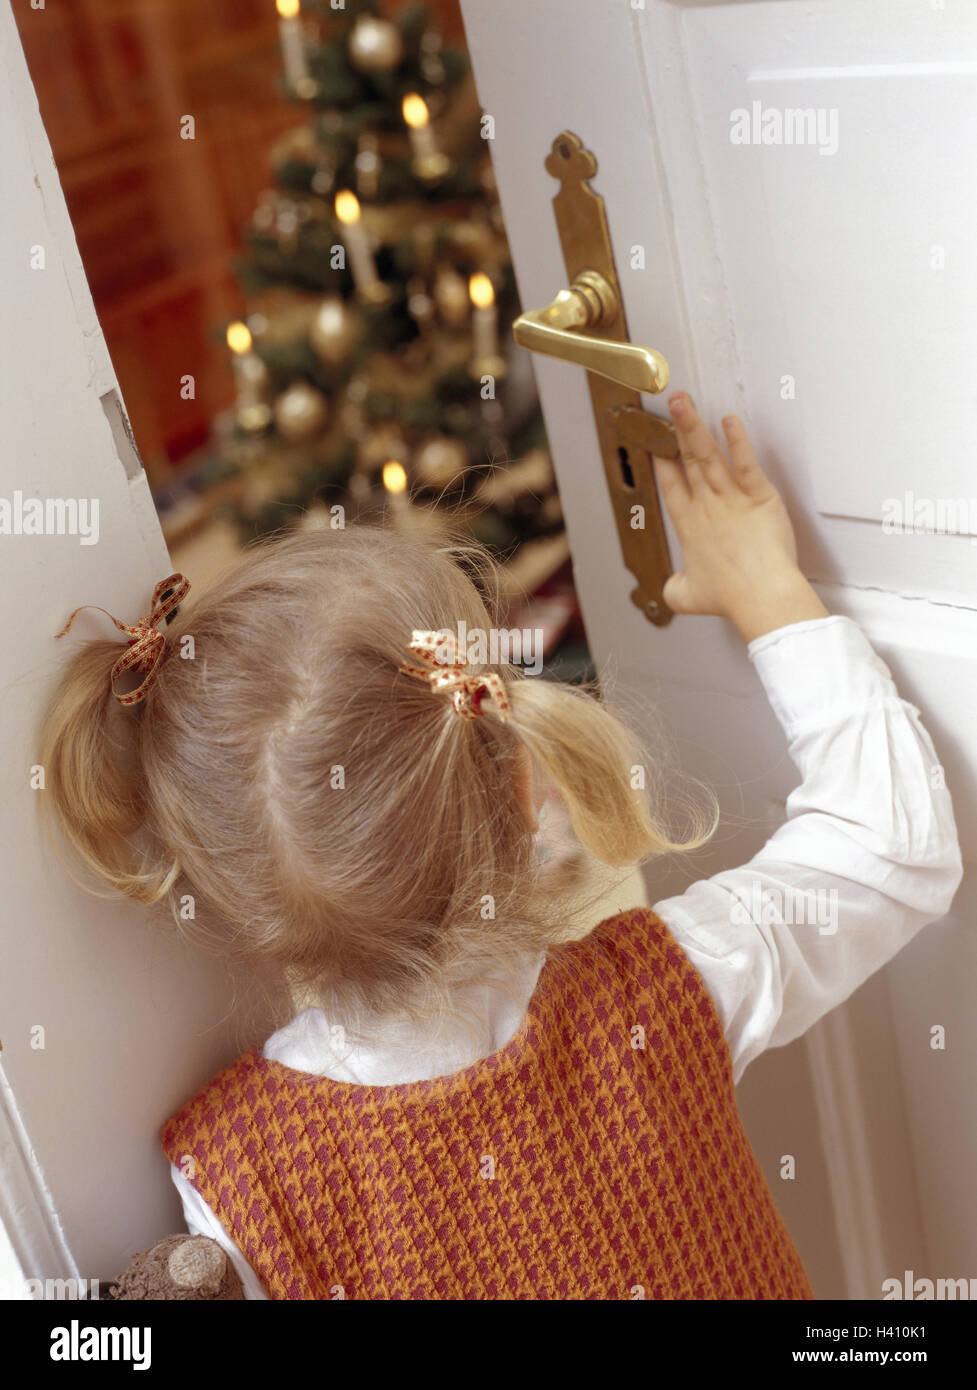 Christmas, sitting rooms, girls, door, opens, back view, view, Christmas tree yule tide, distribution of presents, child, blond, childhood, lighthearted, room door, open, look, voltage, expectation, distribution of presents, Christmas Eve, Christmas Eve, Stock Photo